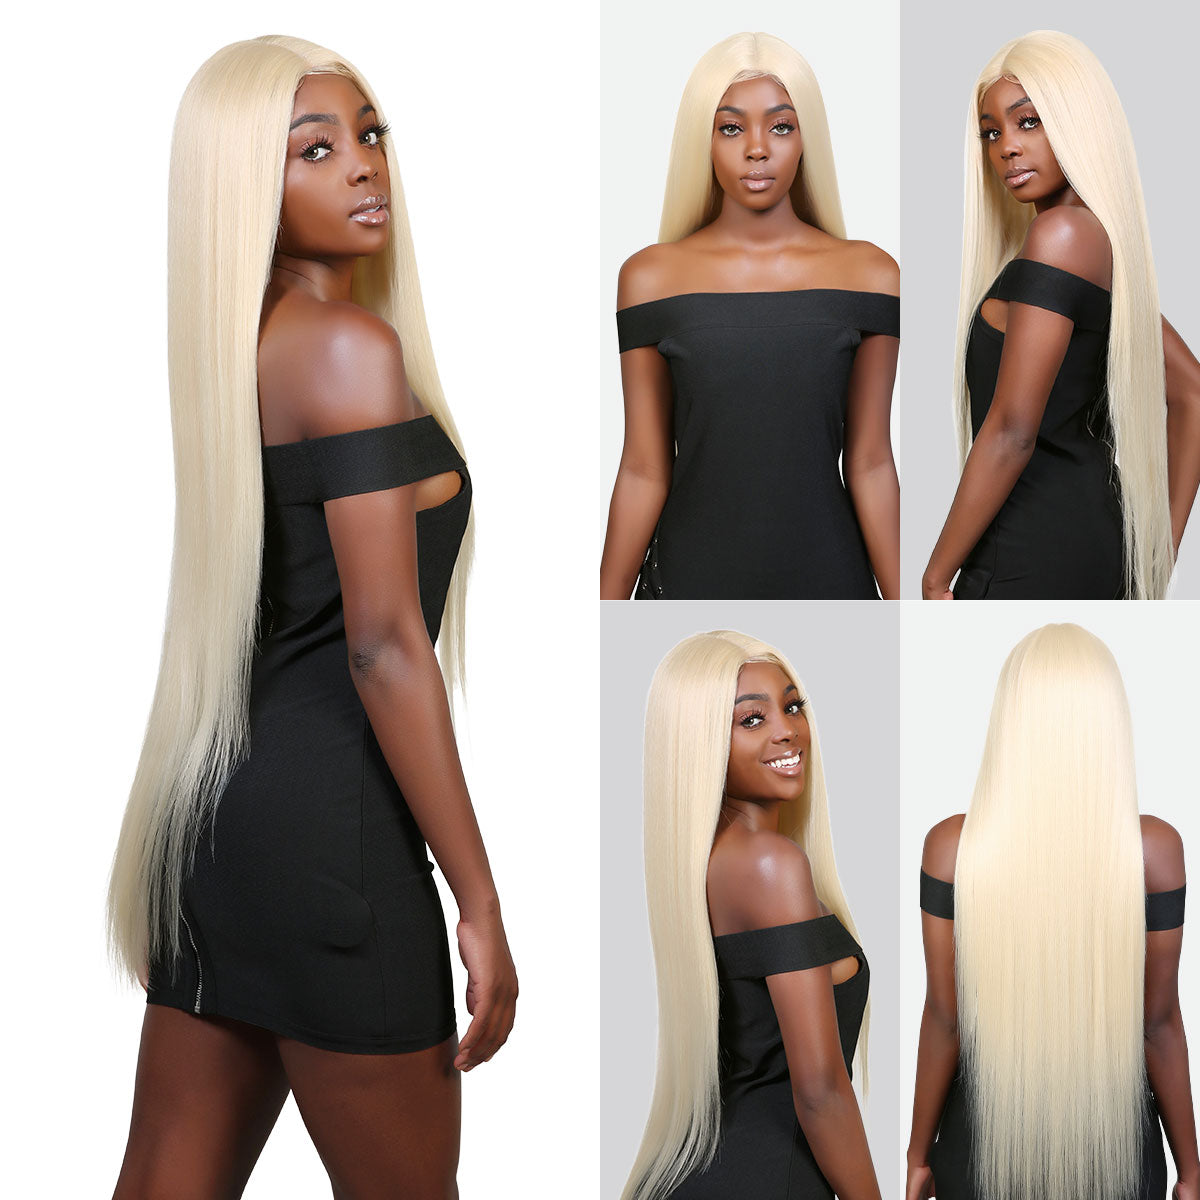 Introducing our stunning 36-inch waist-length straight Swiss lace front wig! Made with heat-resistant synthetic fibers, this wig offers a natural-looking hairline with a 4.5" deep middle center part design, perfect for black women. The soft Swiss lace front ensures comfort and security, while adjustable straps allow for a customizable fit. Elevate your style and enhance your beauty effortlessly with this must-have wig. Shop now for ultimate style and versatility!